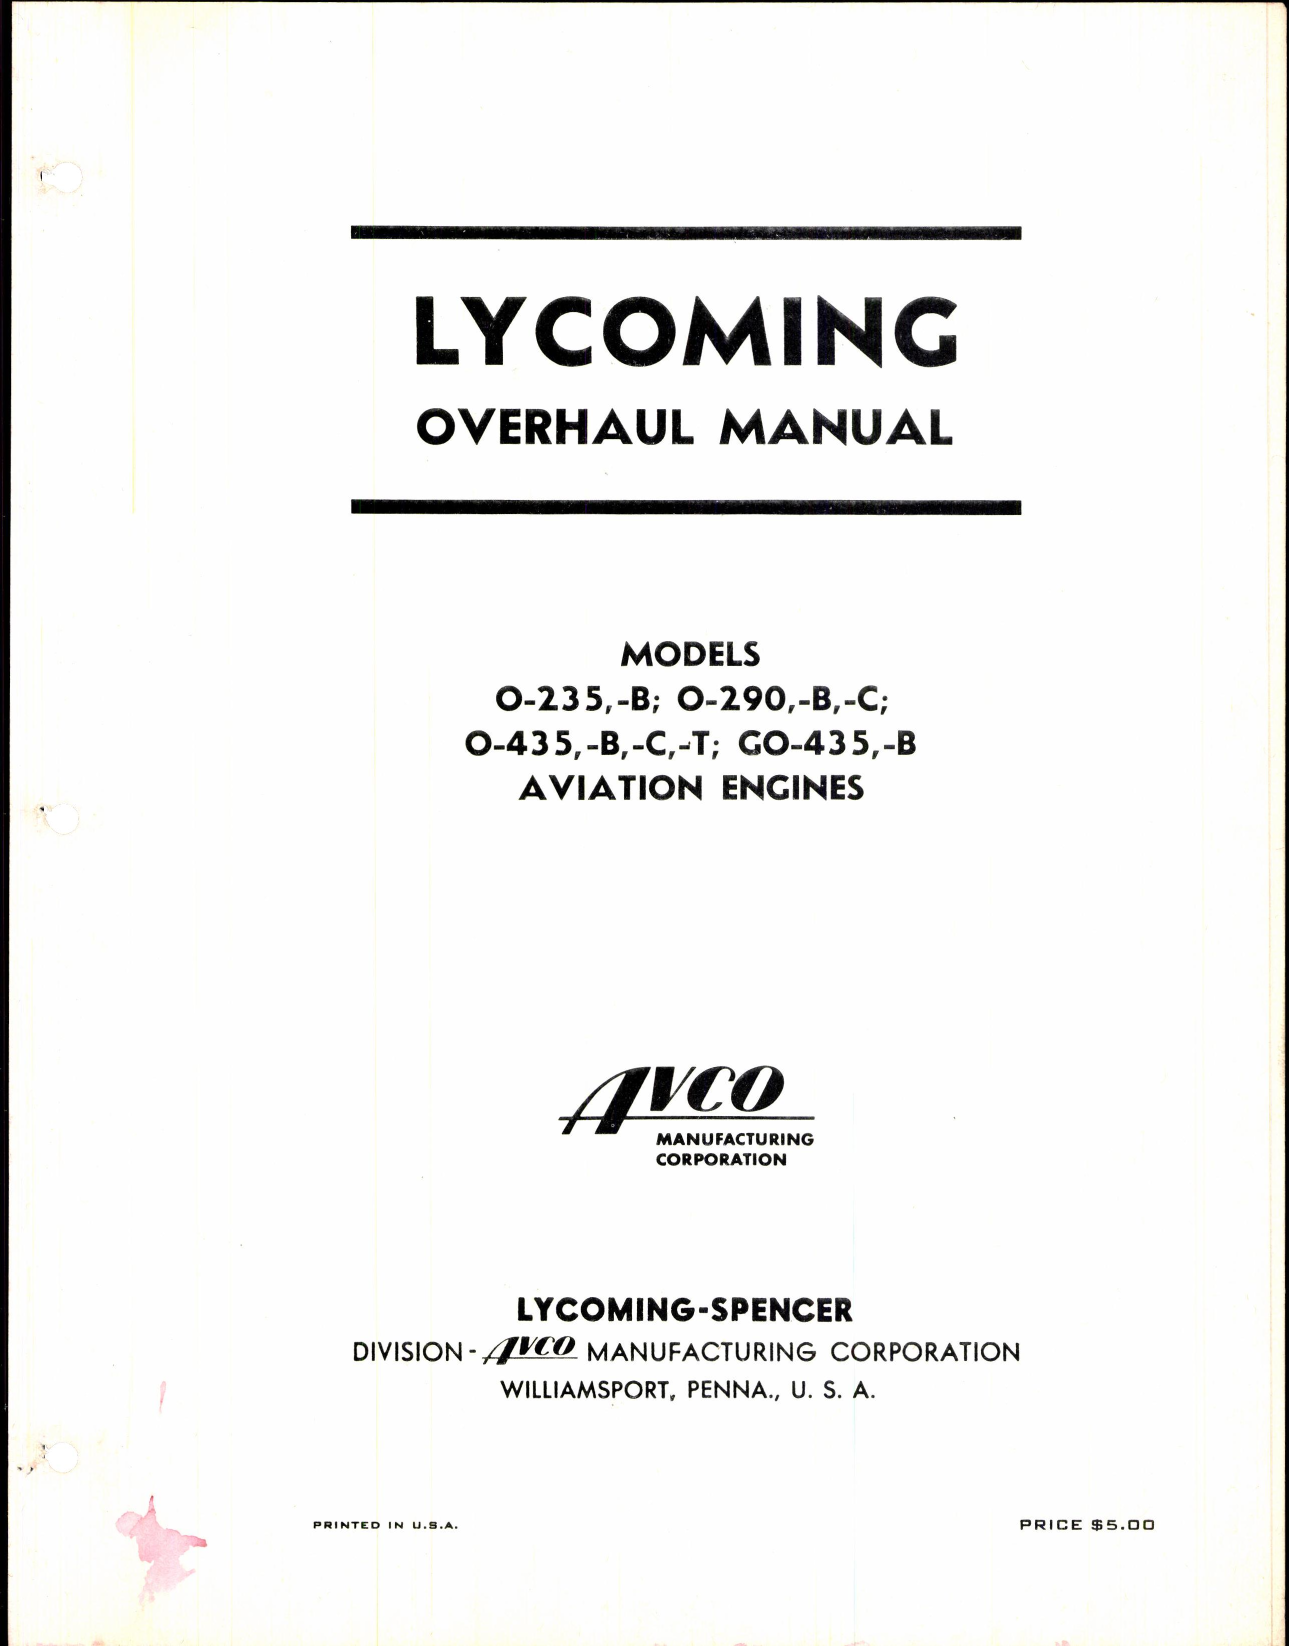 Sample page 1 from AirCorps Library document: Lycoming Overhaul Manual